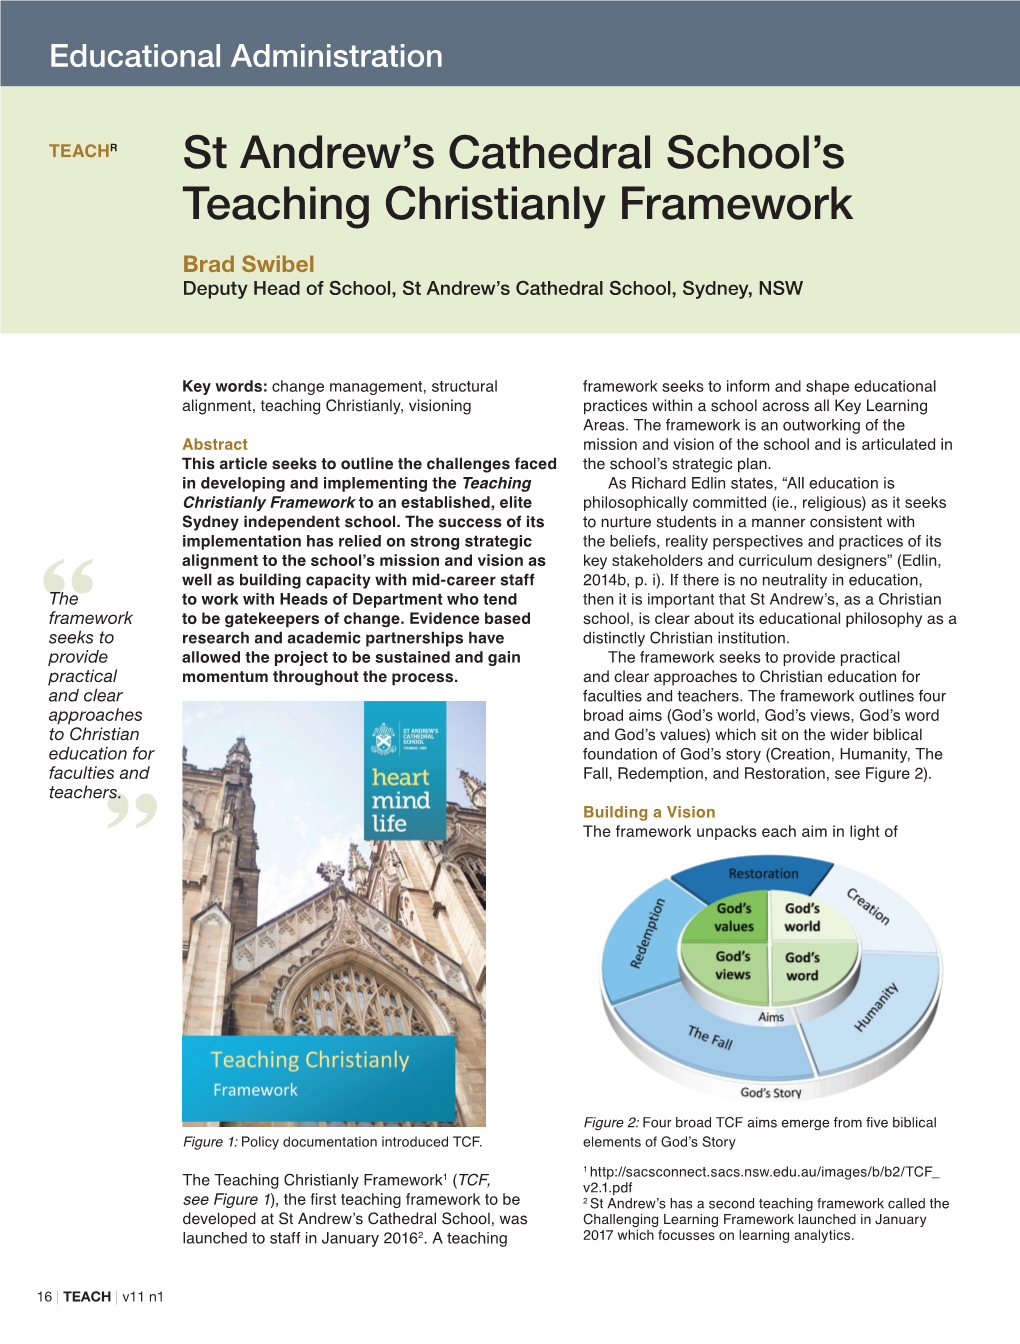 St Andrew's Cathedral School's Teaching Christianly Framework